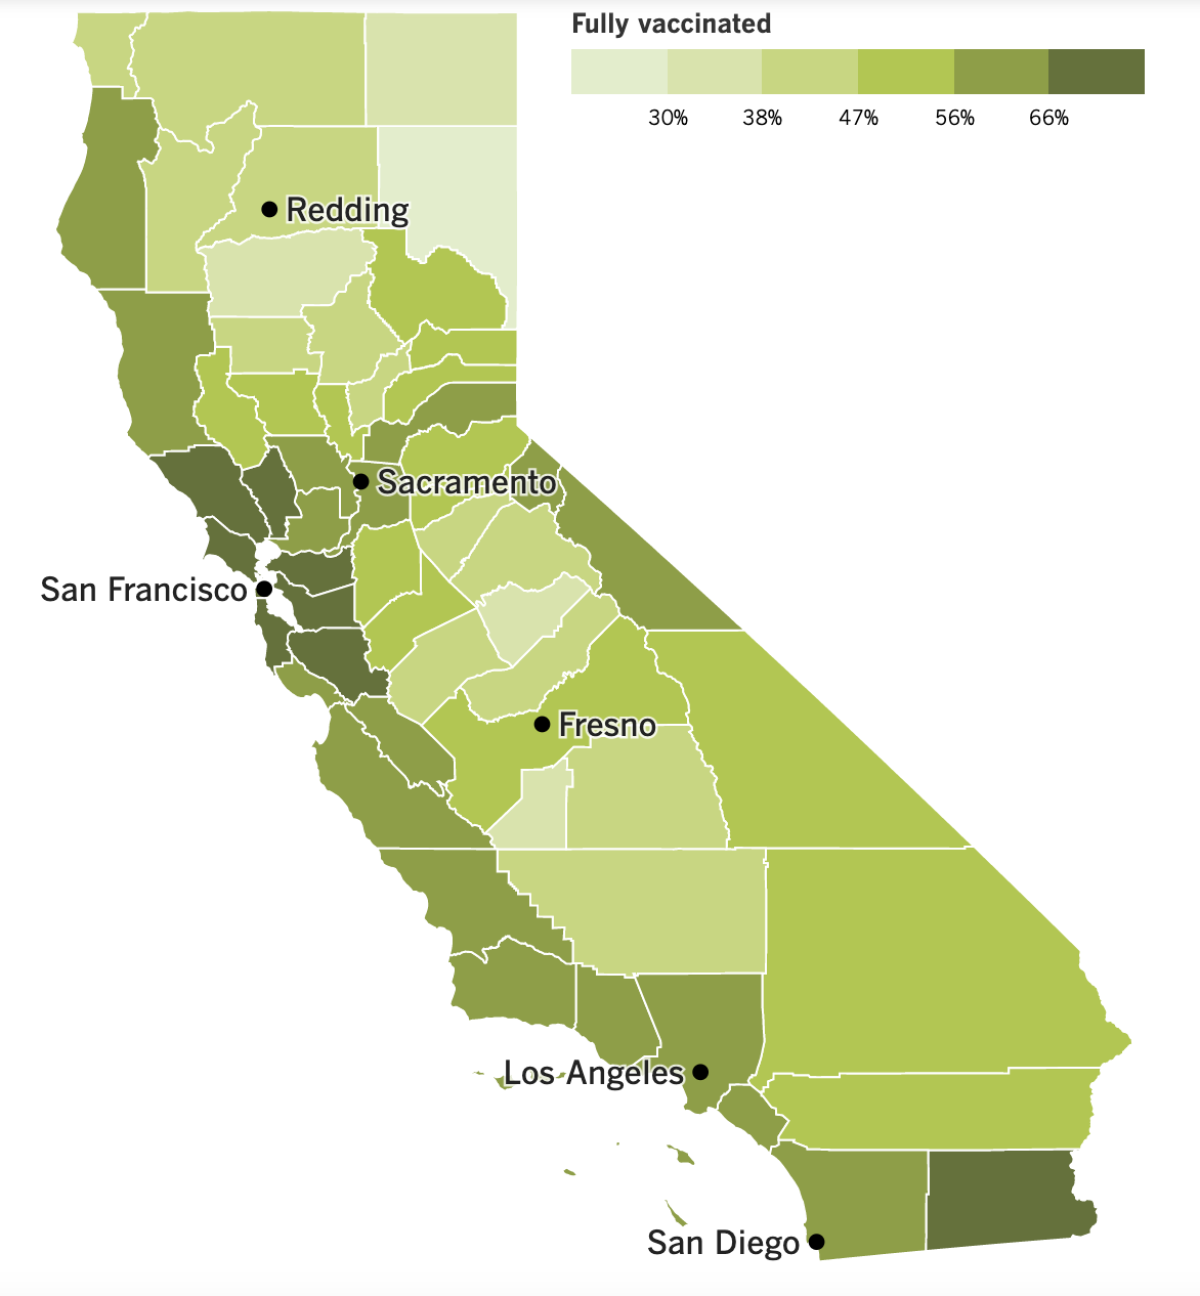 A map that shows California's COVID-19 vaccination progress by county.